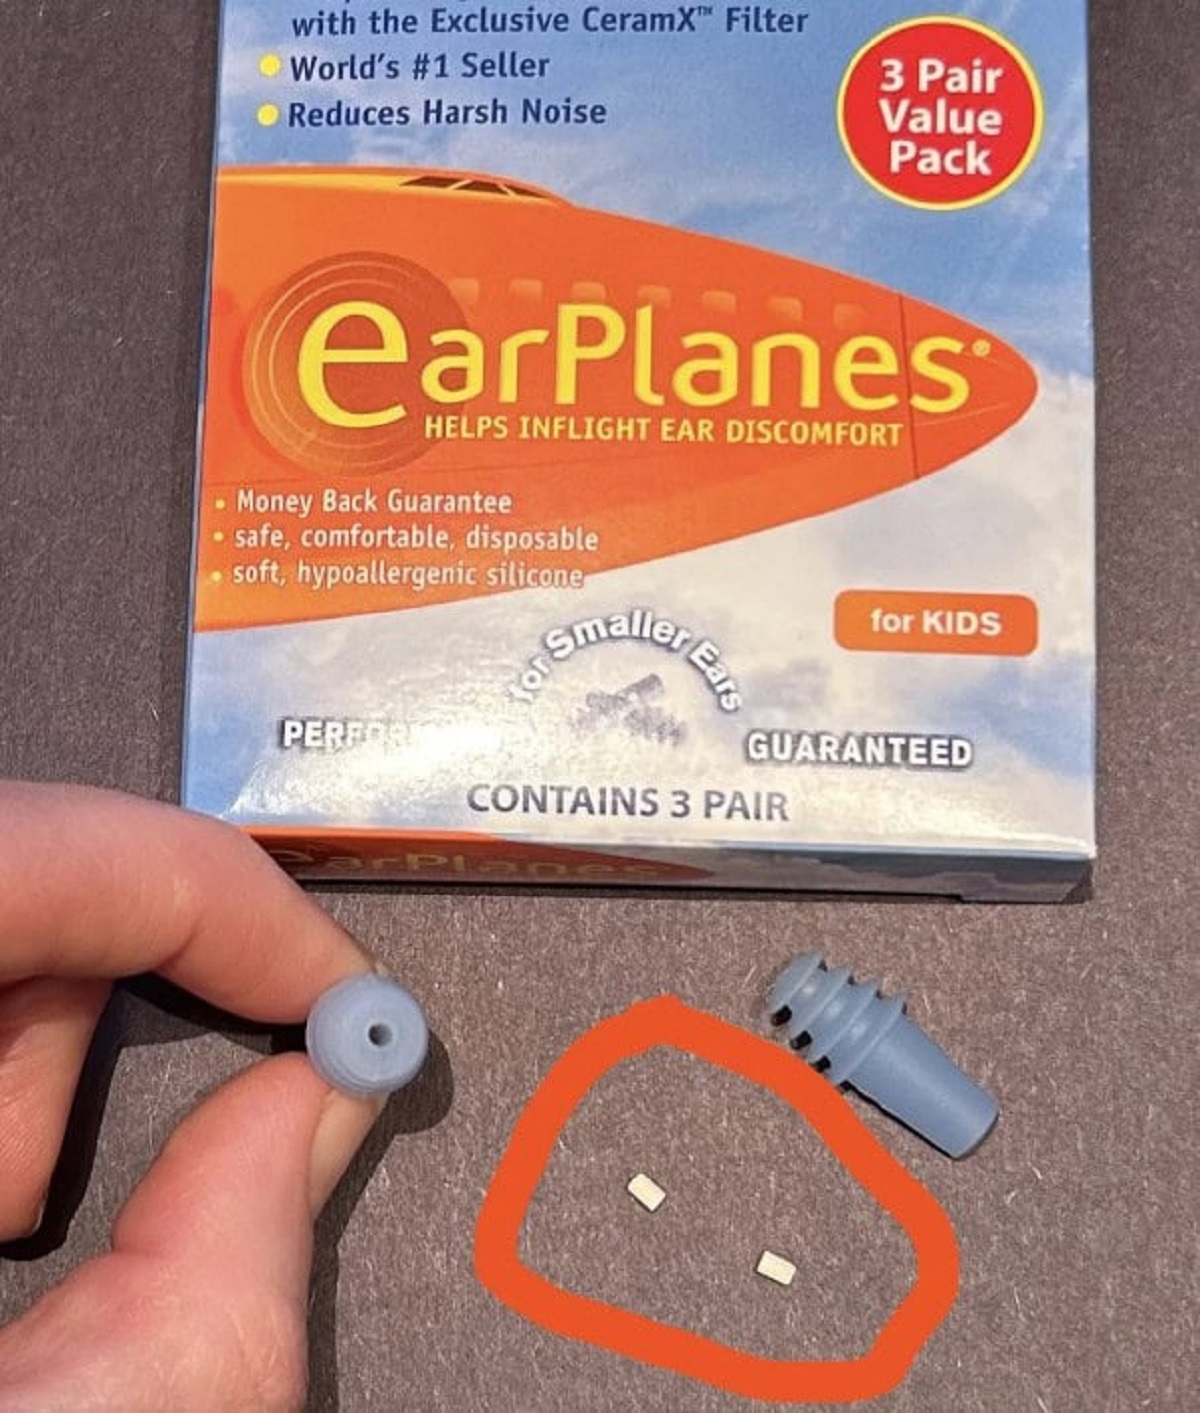 These earplugs have a tiny ceramic filter in them that fell out and got lodged in my 10 year old’s ear canal.